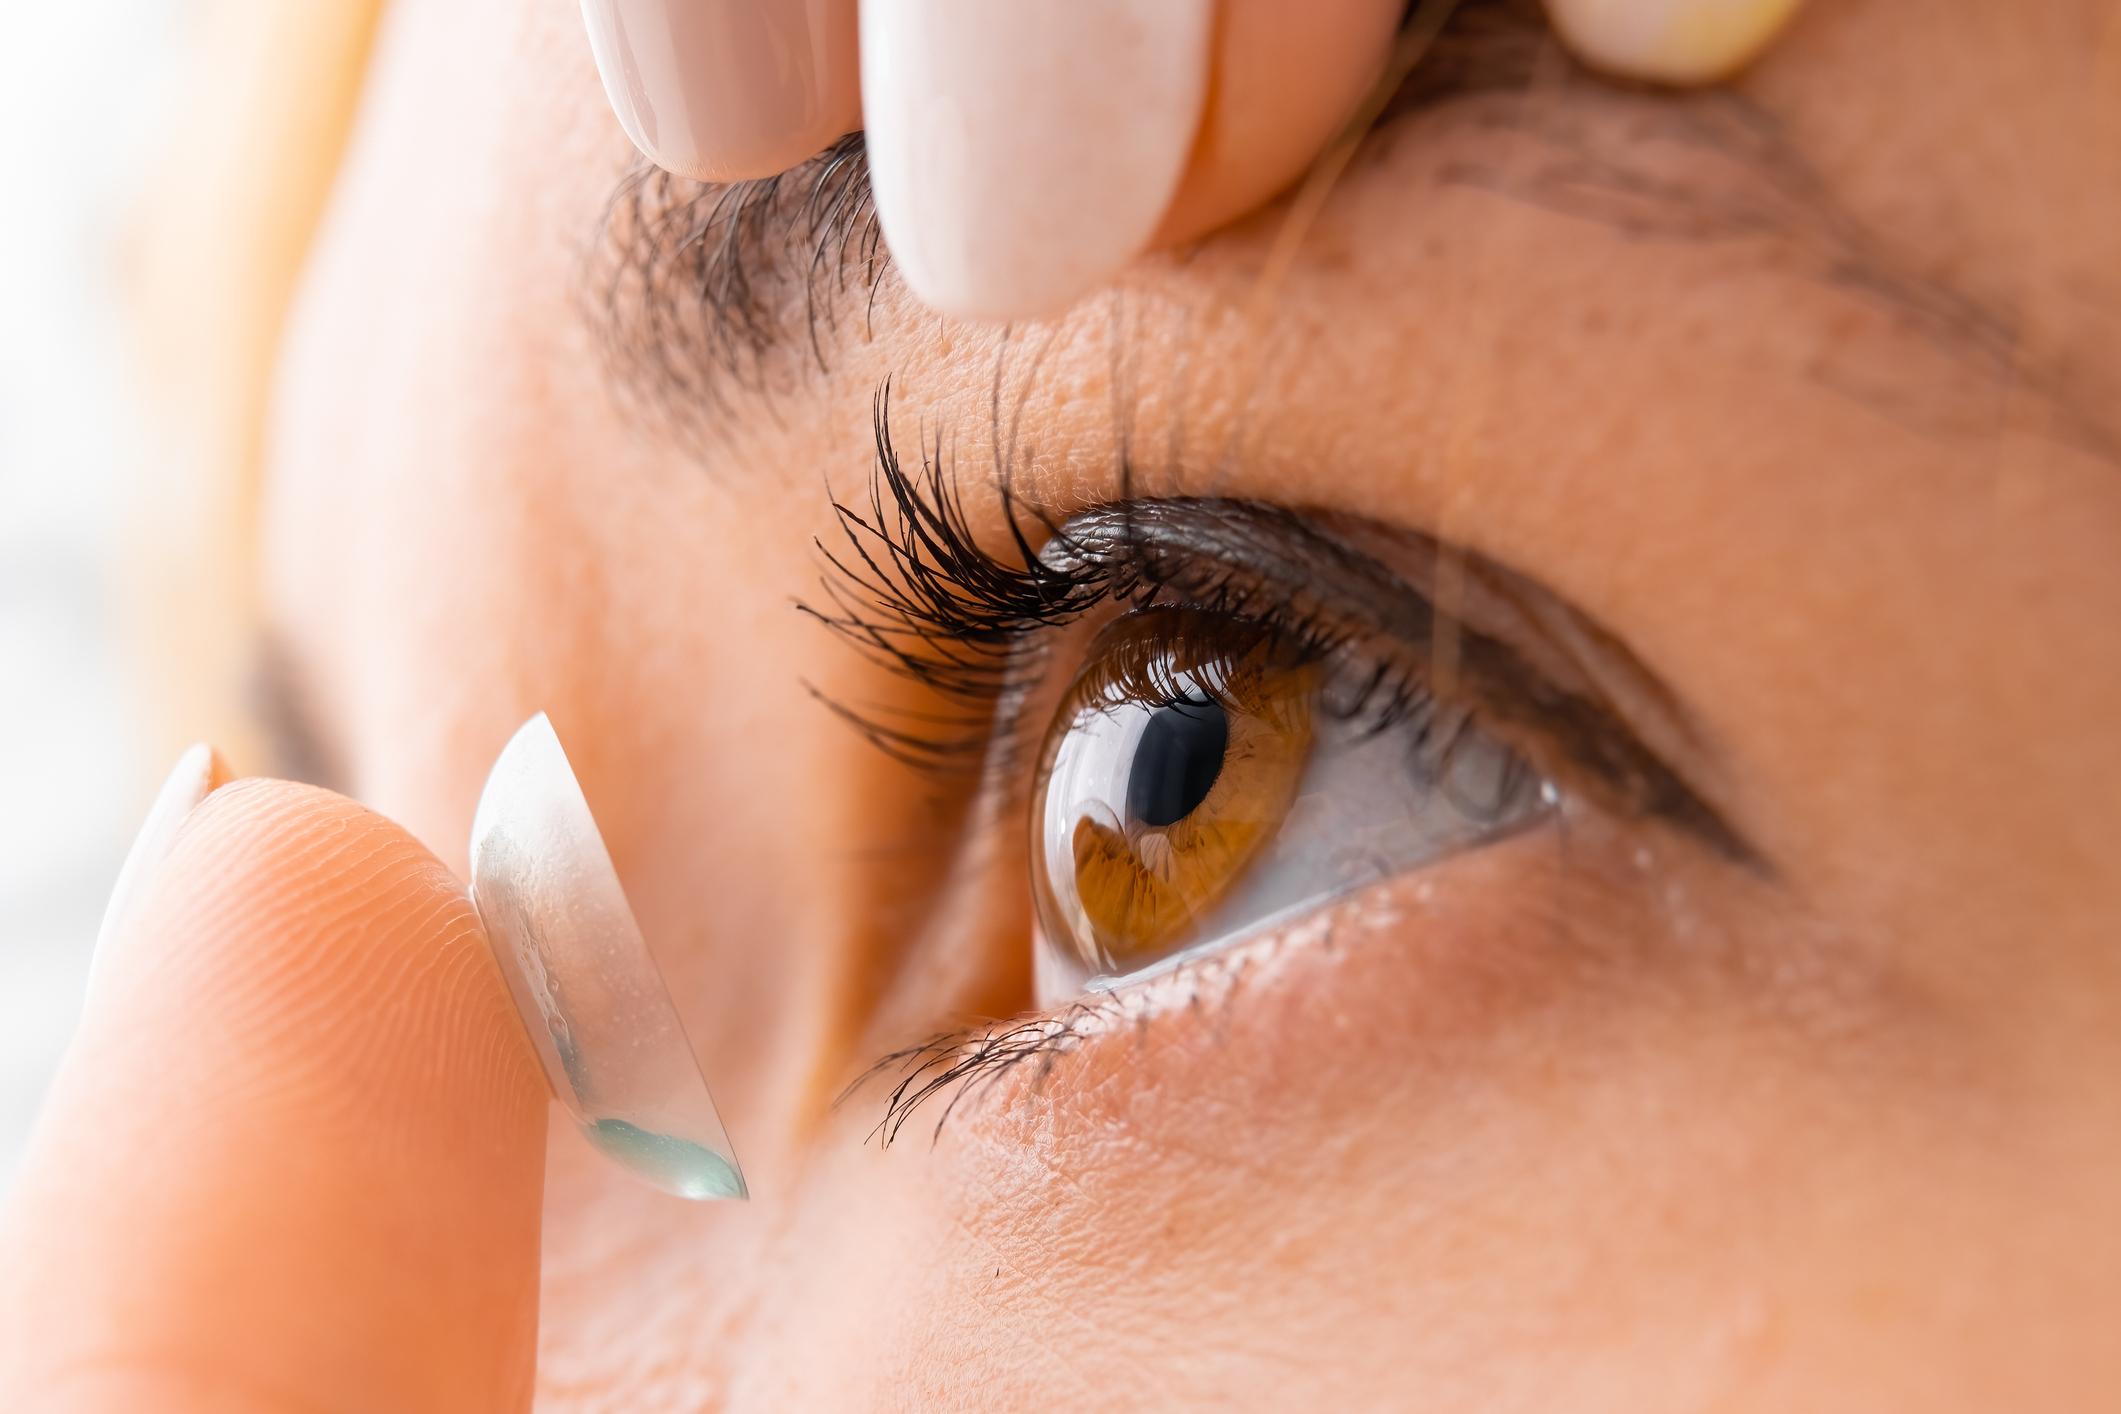 Glaucoma: smart contact lenses to detect this eye disease?